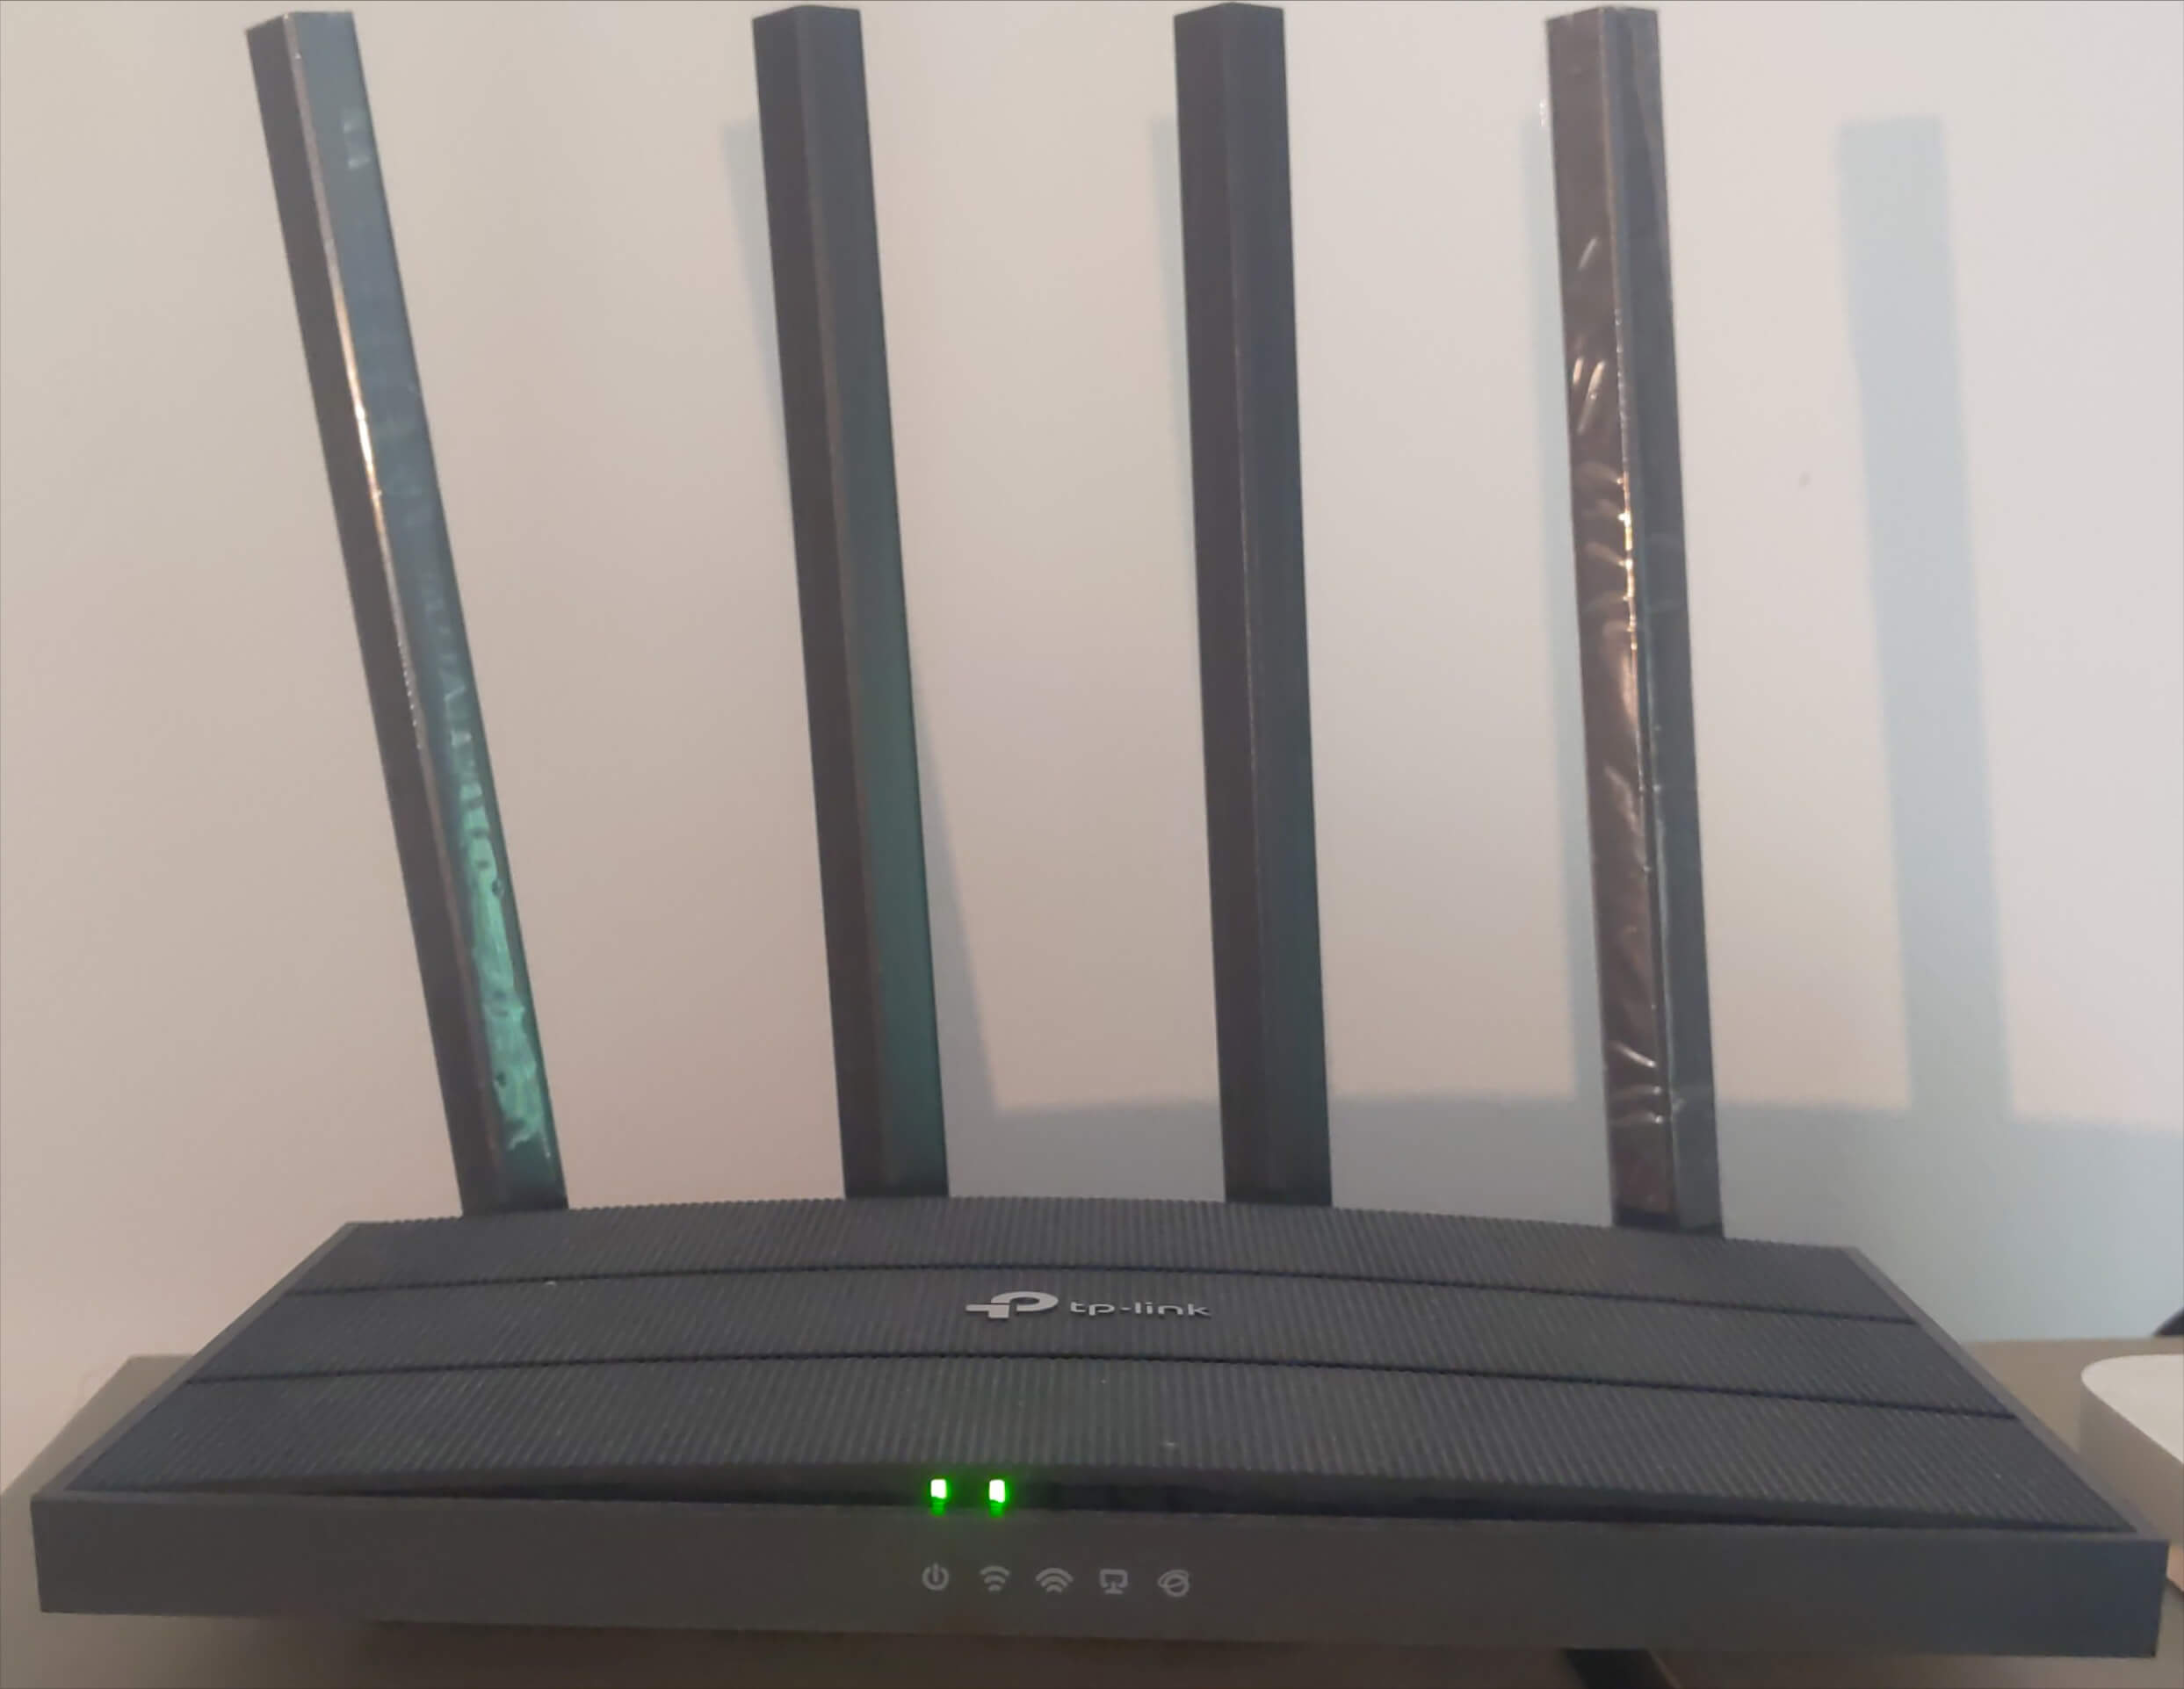 The router